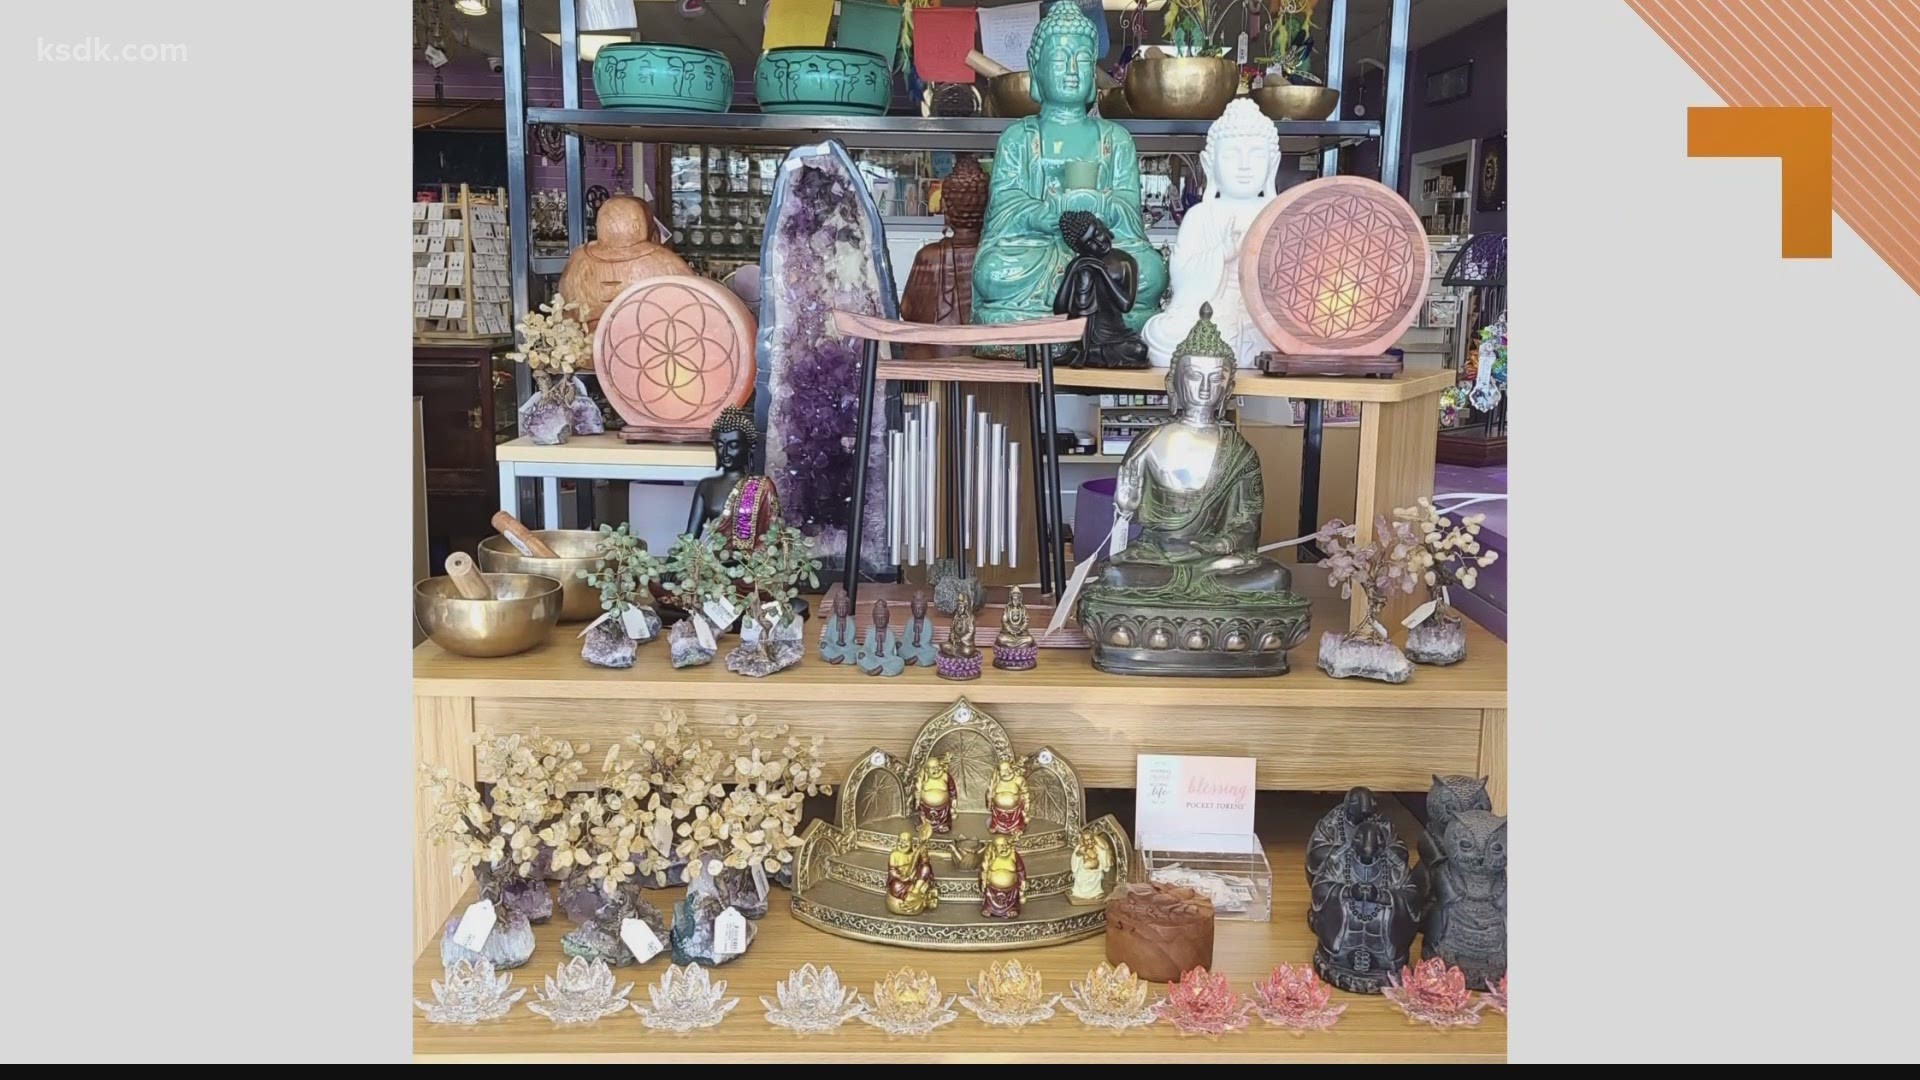 The store has everything from incense and candles to jewelry, books, tarot cards and many more unique gifts.